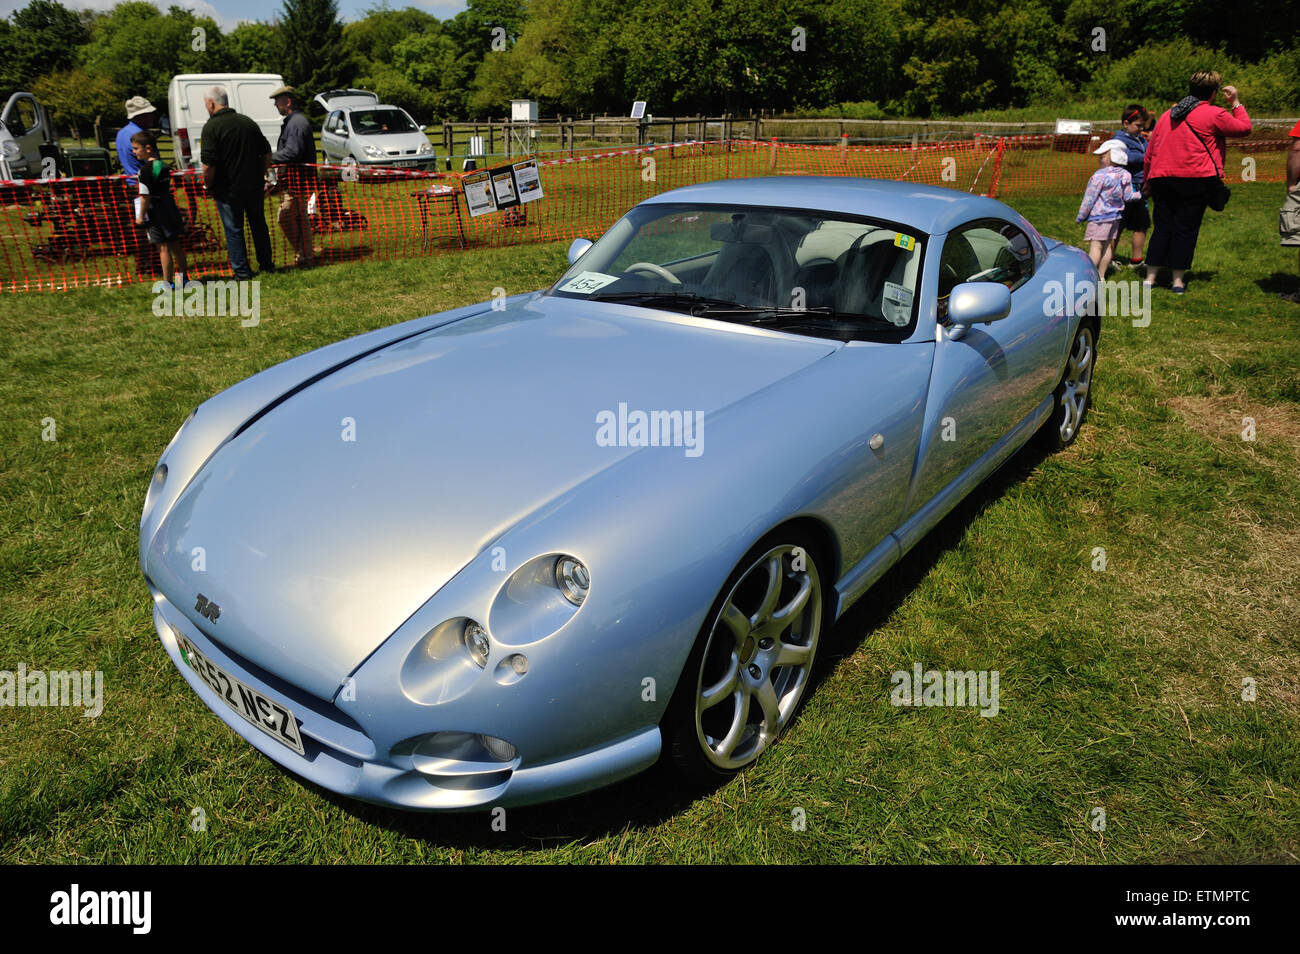 TVR Cerbera at classic vintage car rally show scolton manor pembrokeshire wales Stock Photo